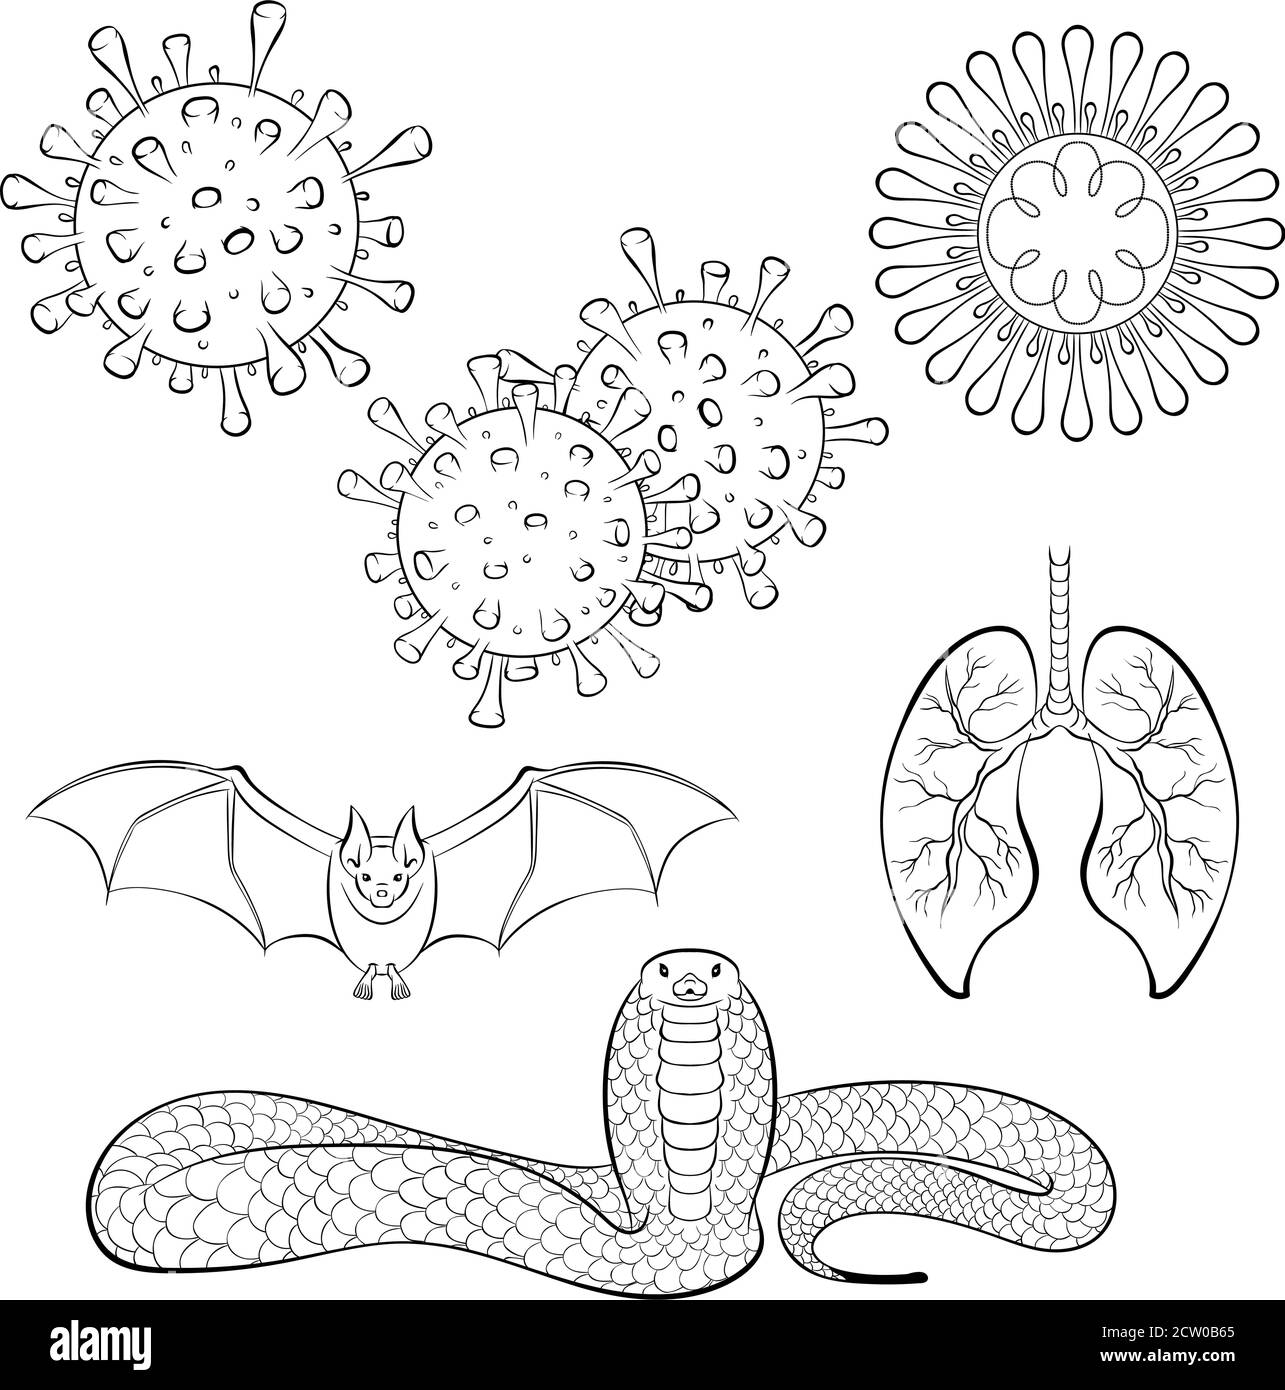 Coronavirus line art icons set. Viruses and probable carriers of infections bat and snake. Hand drawing vector illustration isolated on white background Stock Vector